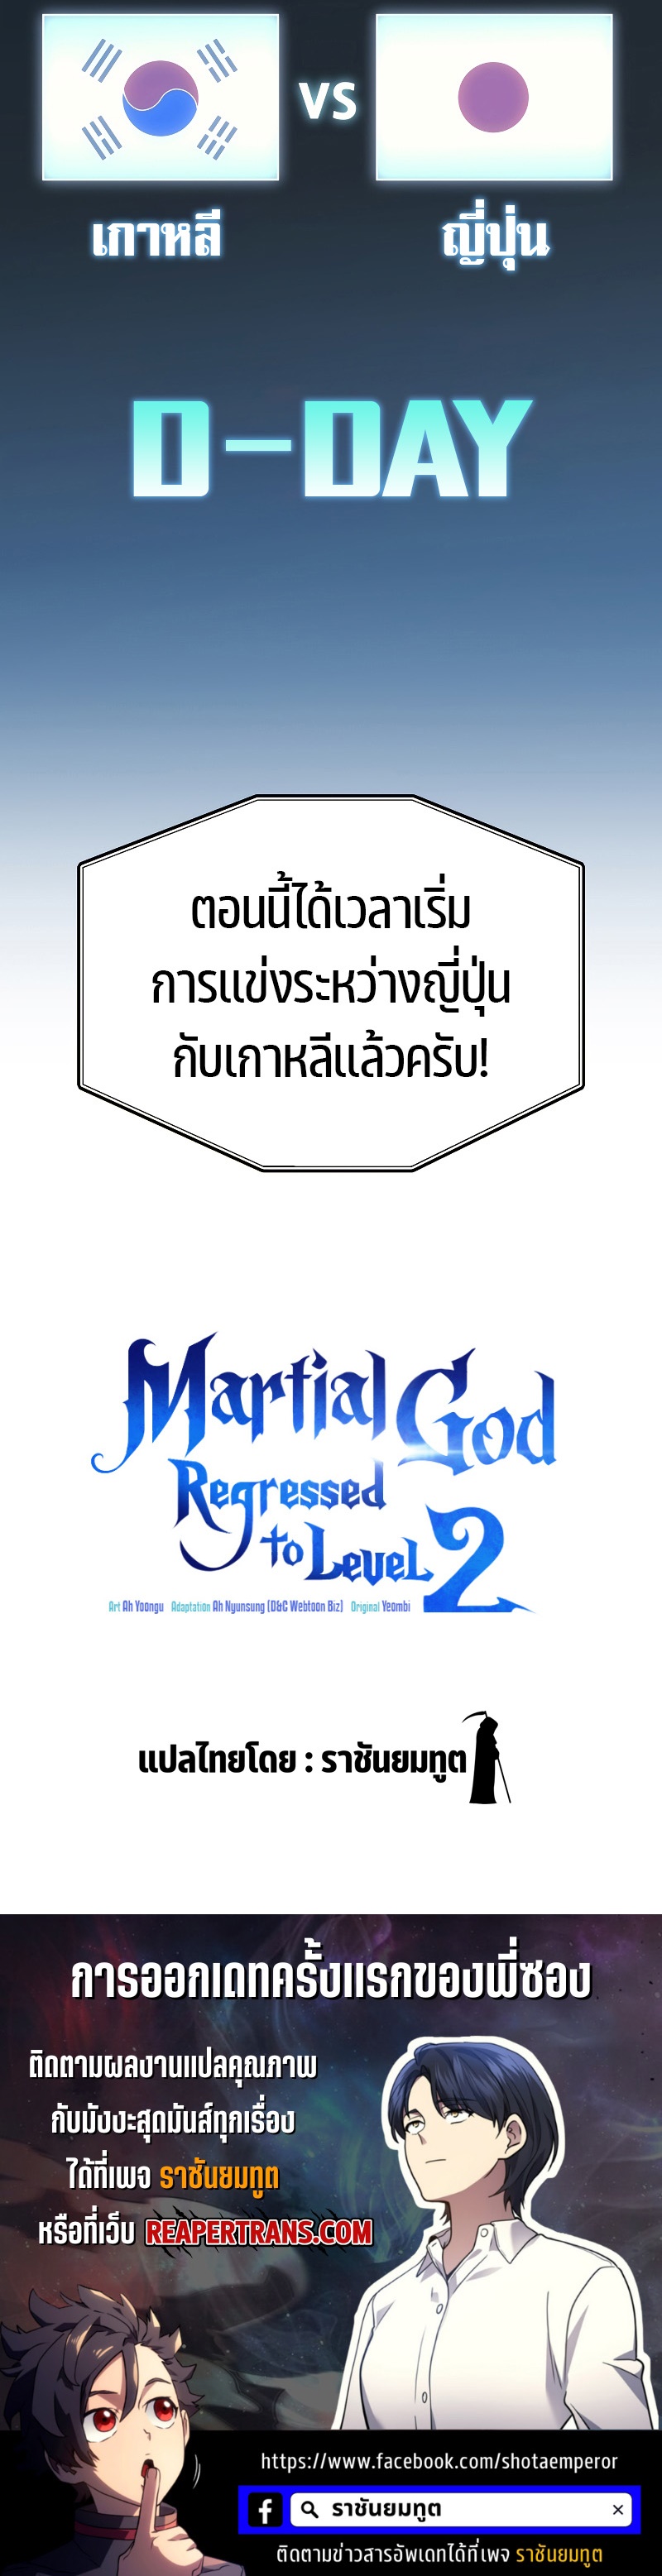 martial god regressed to level 2 33.38